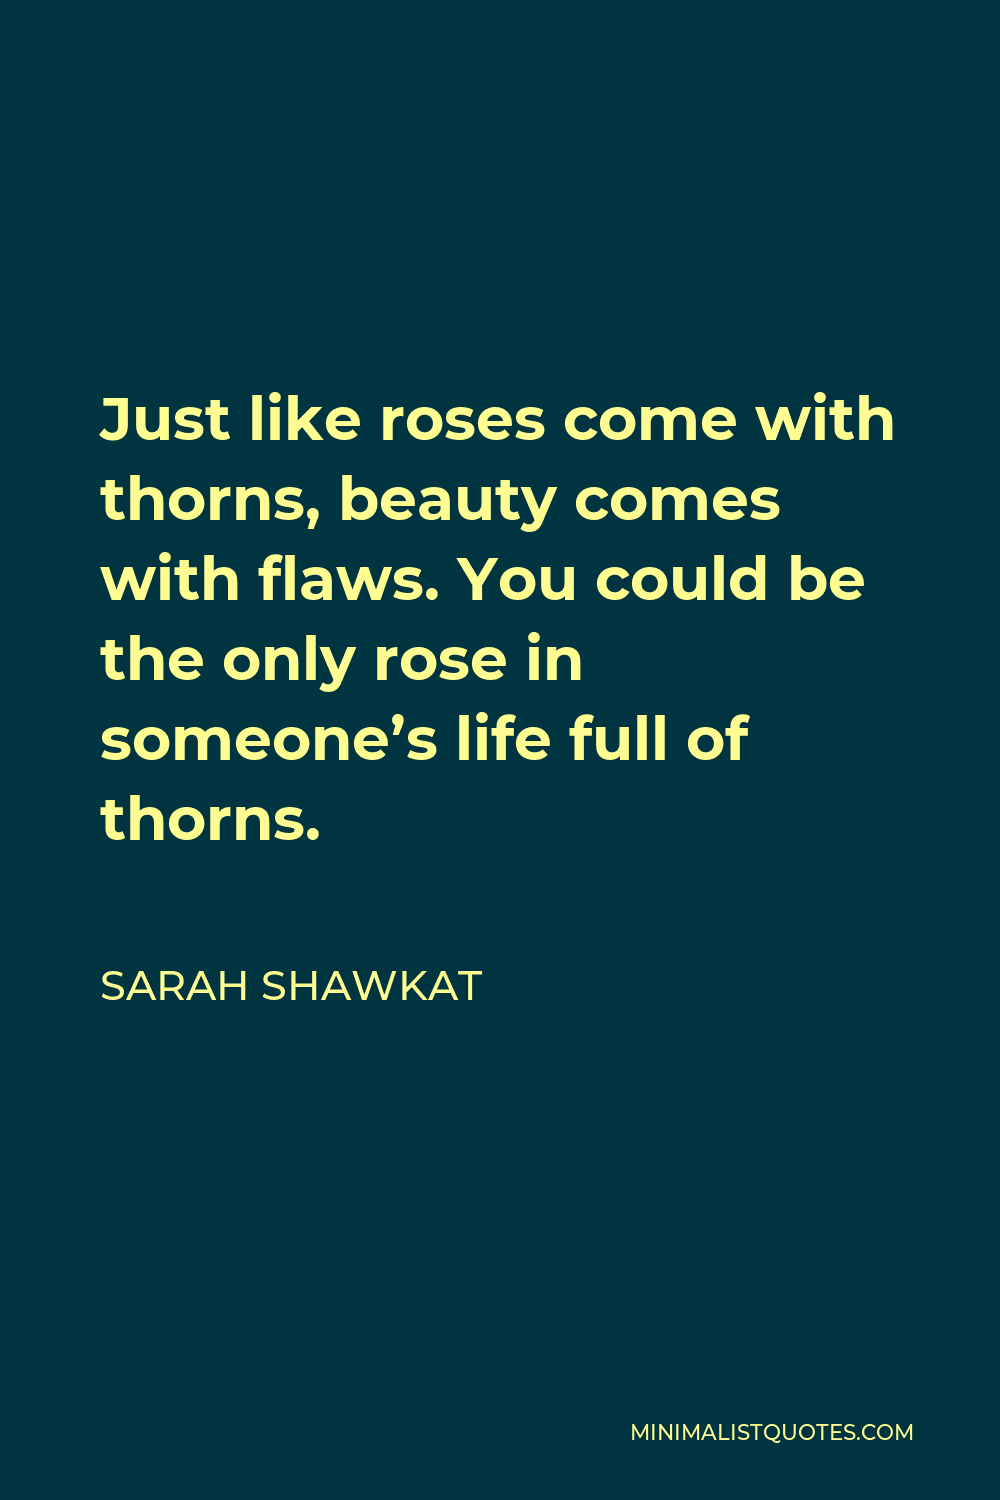 Sarah Shawkat Quote - Just like roses come with thorns, beauty comes with flaws. You could be the only rose in someone’s life full of thorns.